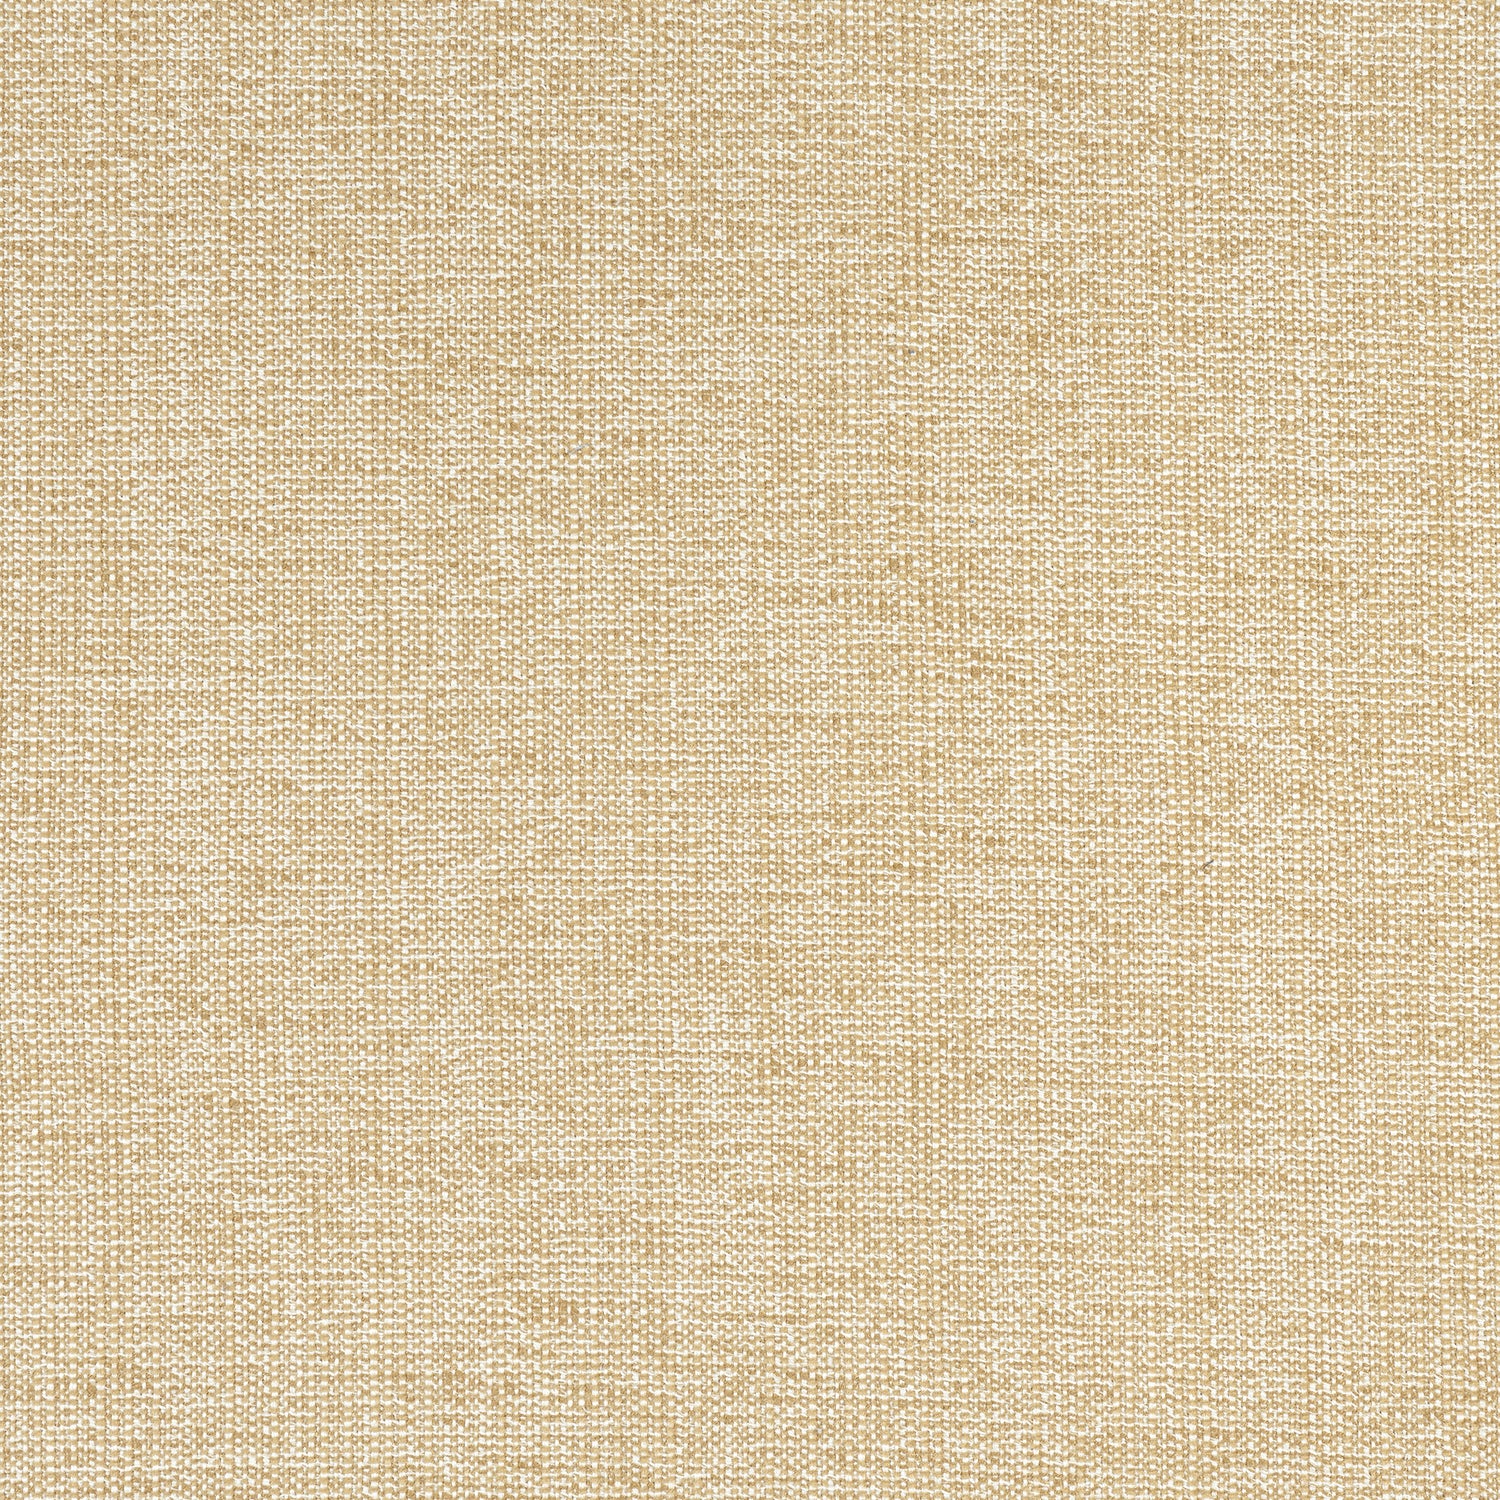 Sacchi fabric in caramel color - pattern number W8756 - by Thibaut in the Haven Textures collection